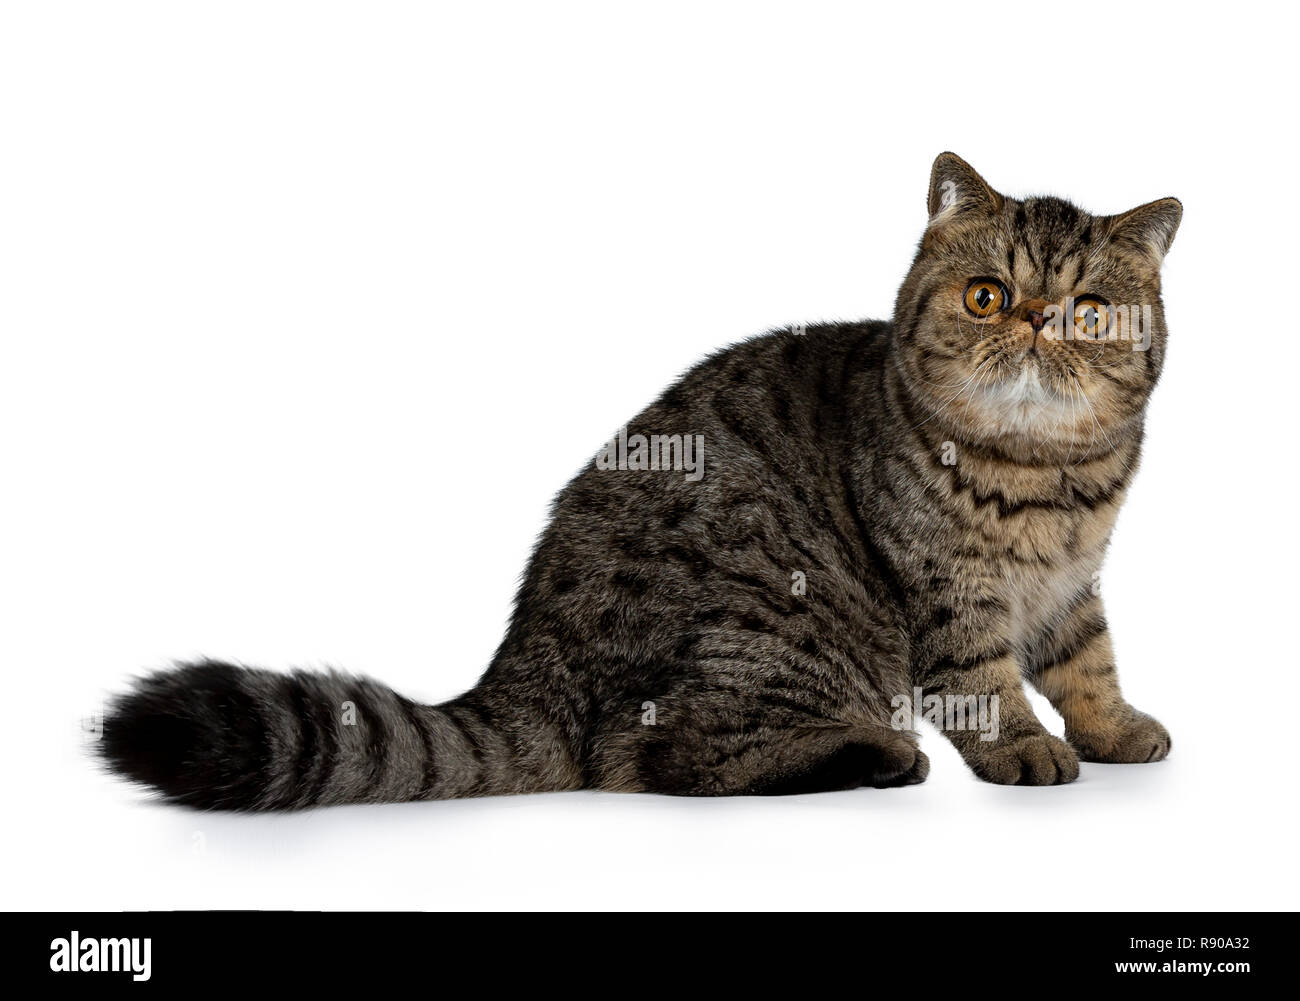 Adorable black tabby Exotic Shorthair cat kitten, sitting side ways with tail behind body. Looking at camera with big round orange eyes. Isolated on a Stock Photo